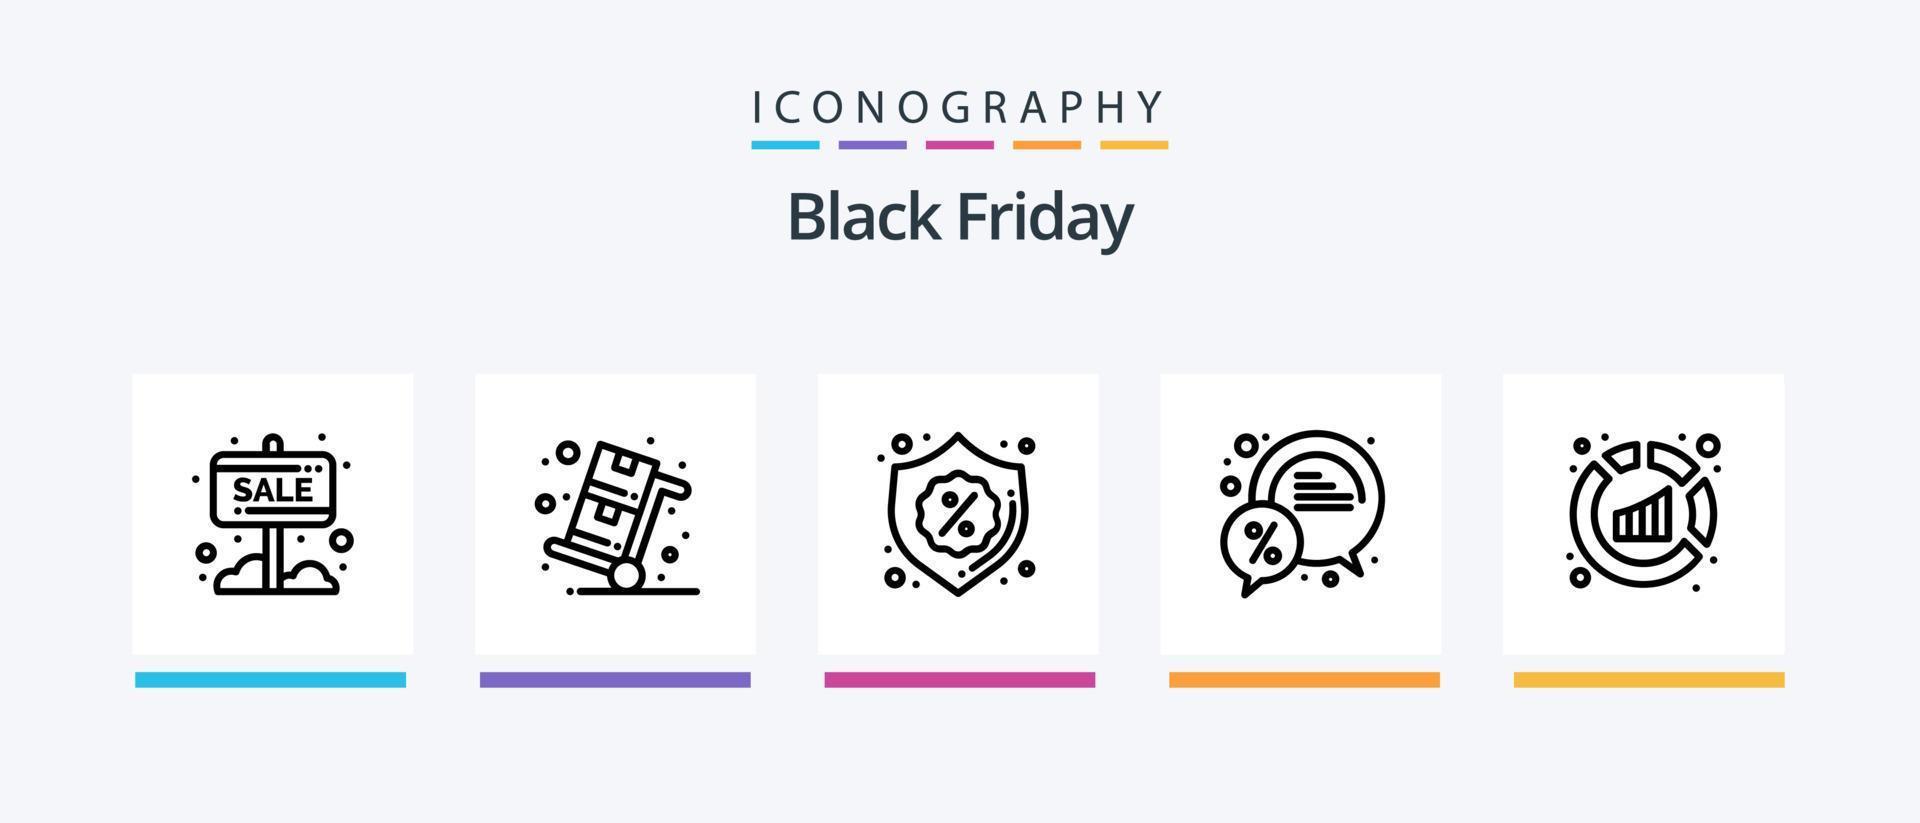 Black Friday Line 5 Icon Pack Including call. percent. agent. discount. bubble. Creative Icons Design vector